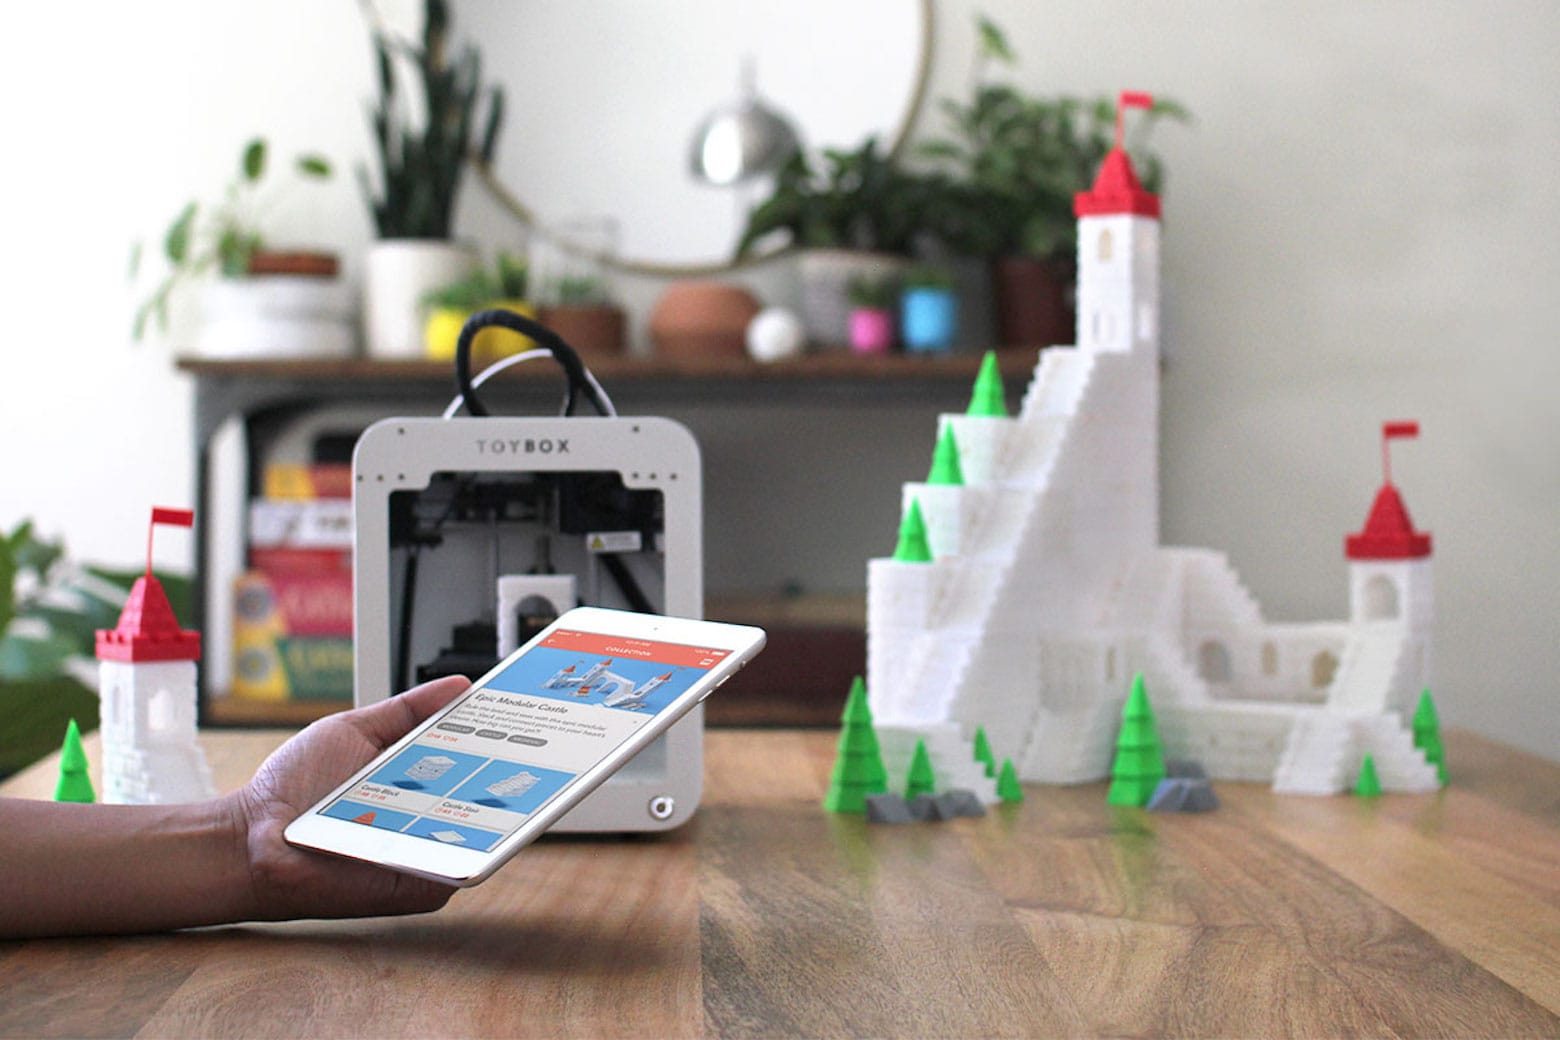 Make toys with this iPad-powered 3D printer for teenagers